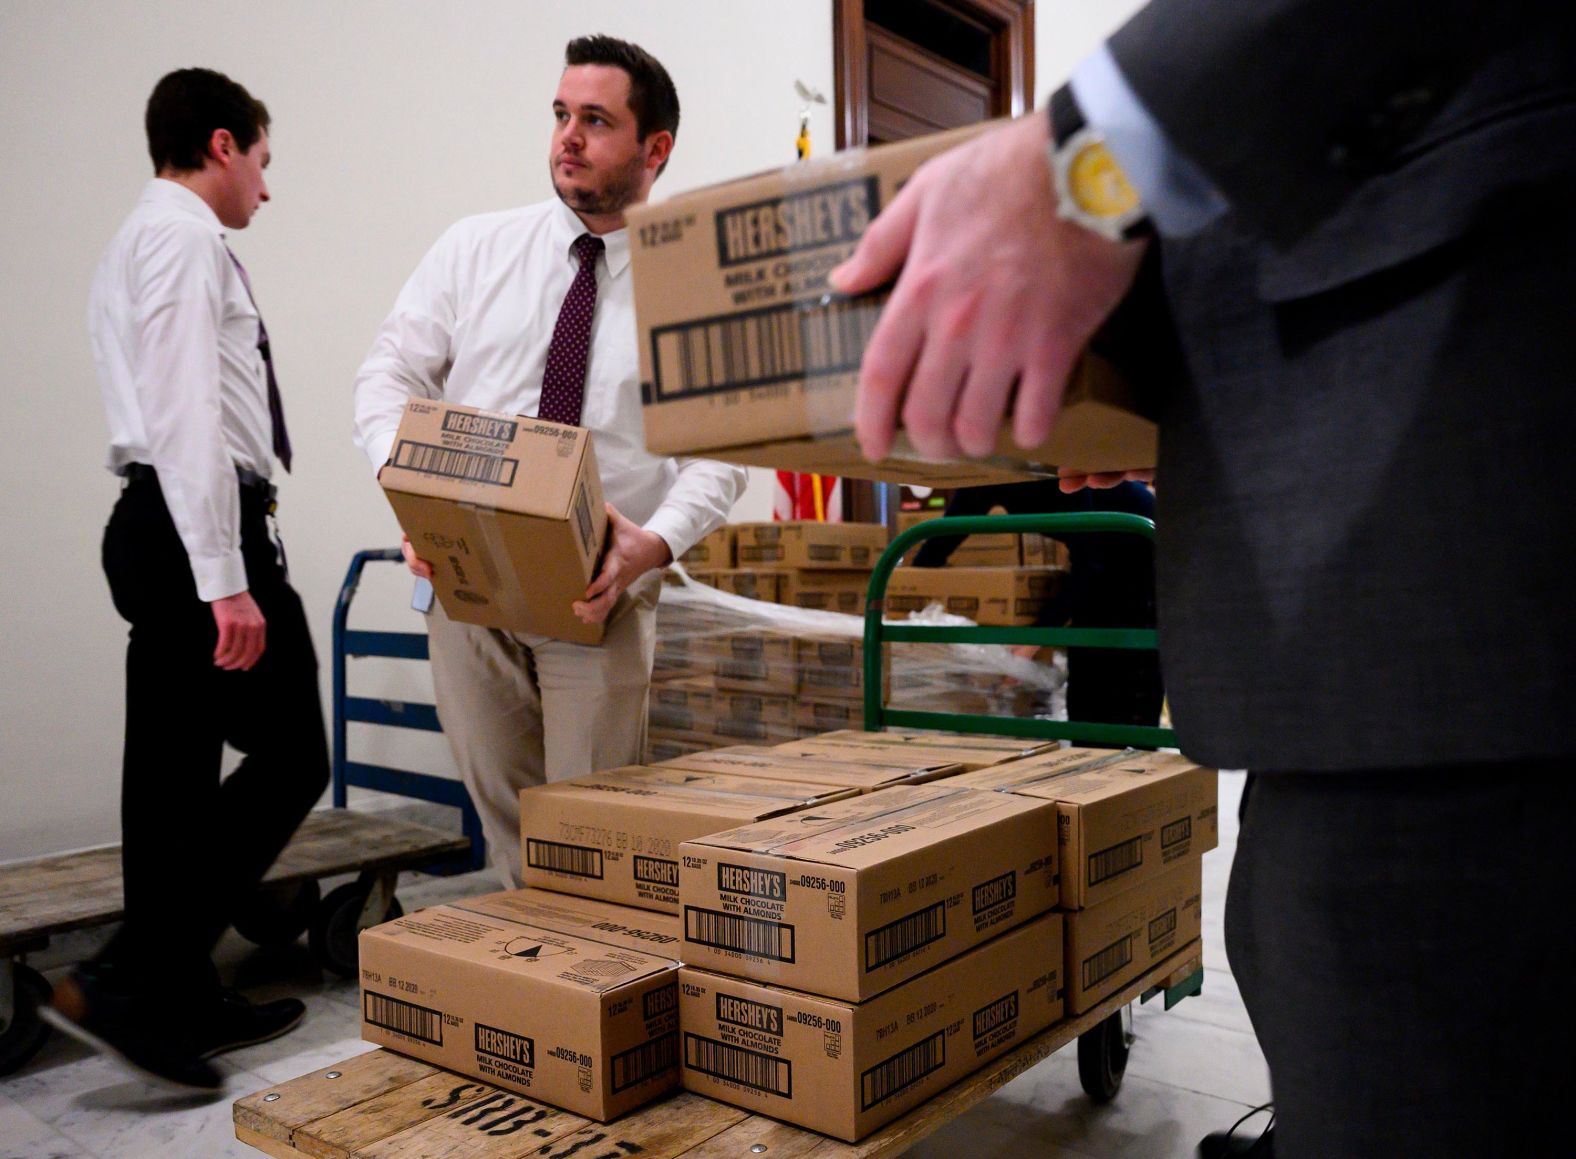 Staff members load boxes of Hershey's candy onto carts outside the office of Sen. Pat Toomey on January 24. Hershey's sent the candy to resupply Toomey's desk on the Senate floor, known as the candy desk, for the impeachment trial. 